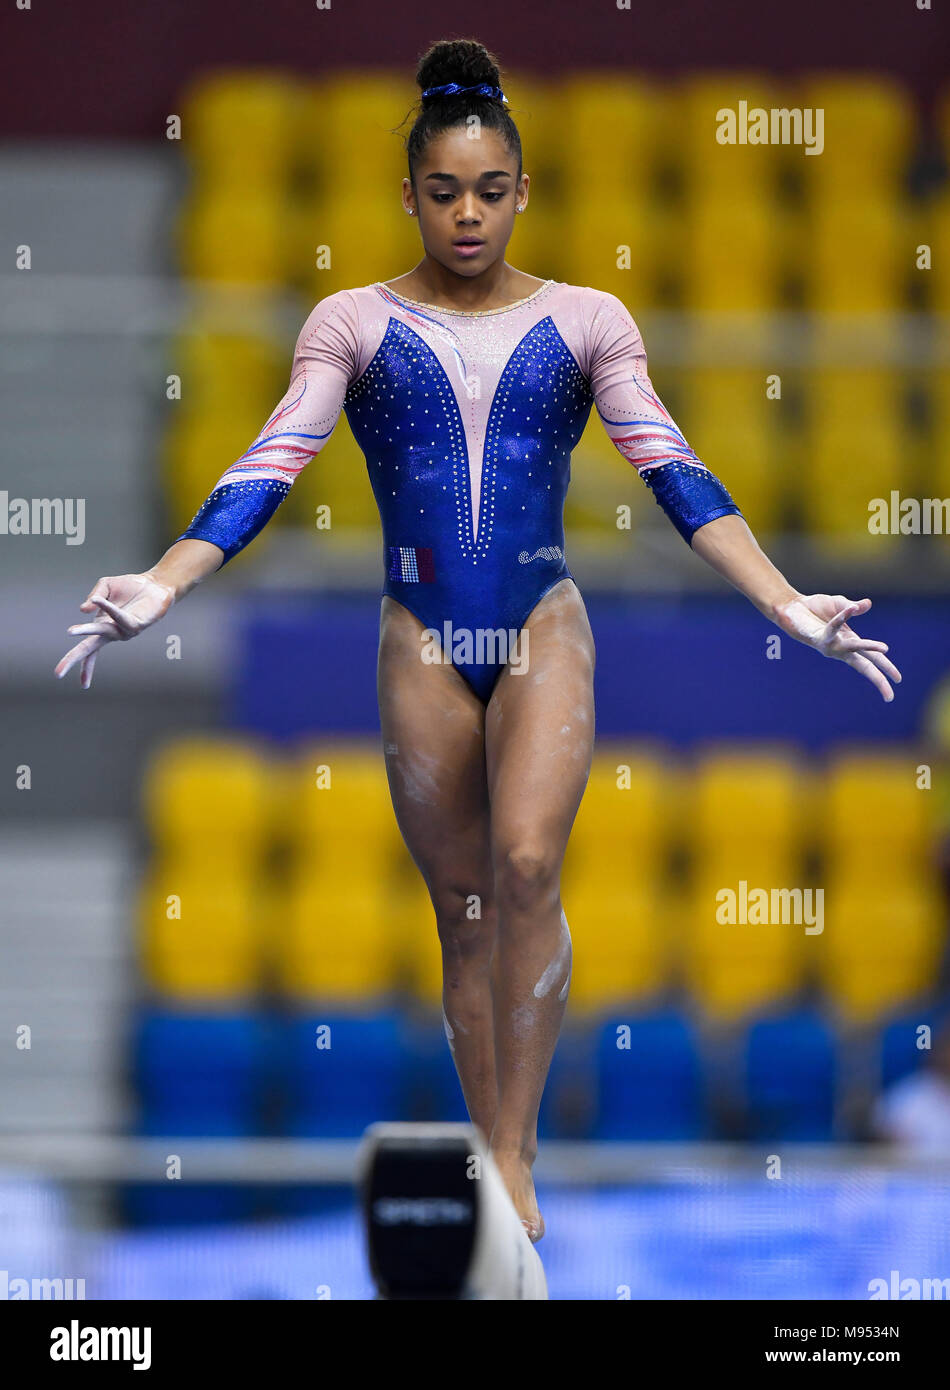 Doha, Capital of Qatar. 22nd Mar, 2018. Melanie De Jesus Dos Santos of France competes during the women's Balance Beam qualifying round of the 11th FIG Artistic Gymnastics World Cup in Doha, Capital of Qatar, on March 22, 2018. Credit: Nikku/Xinhua/Alamy Live News Stock Photo